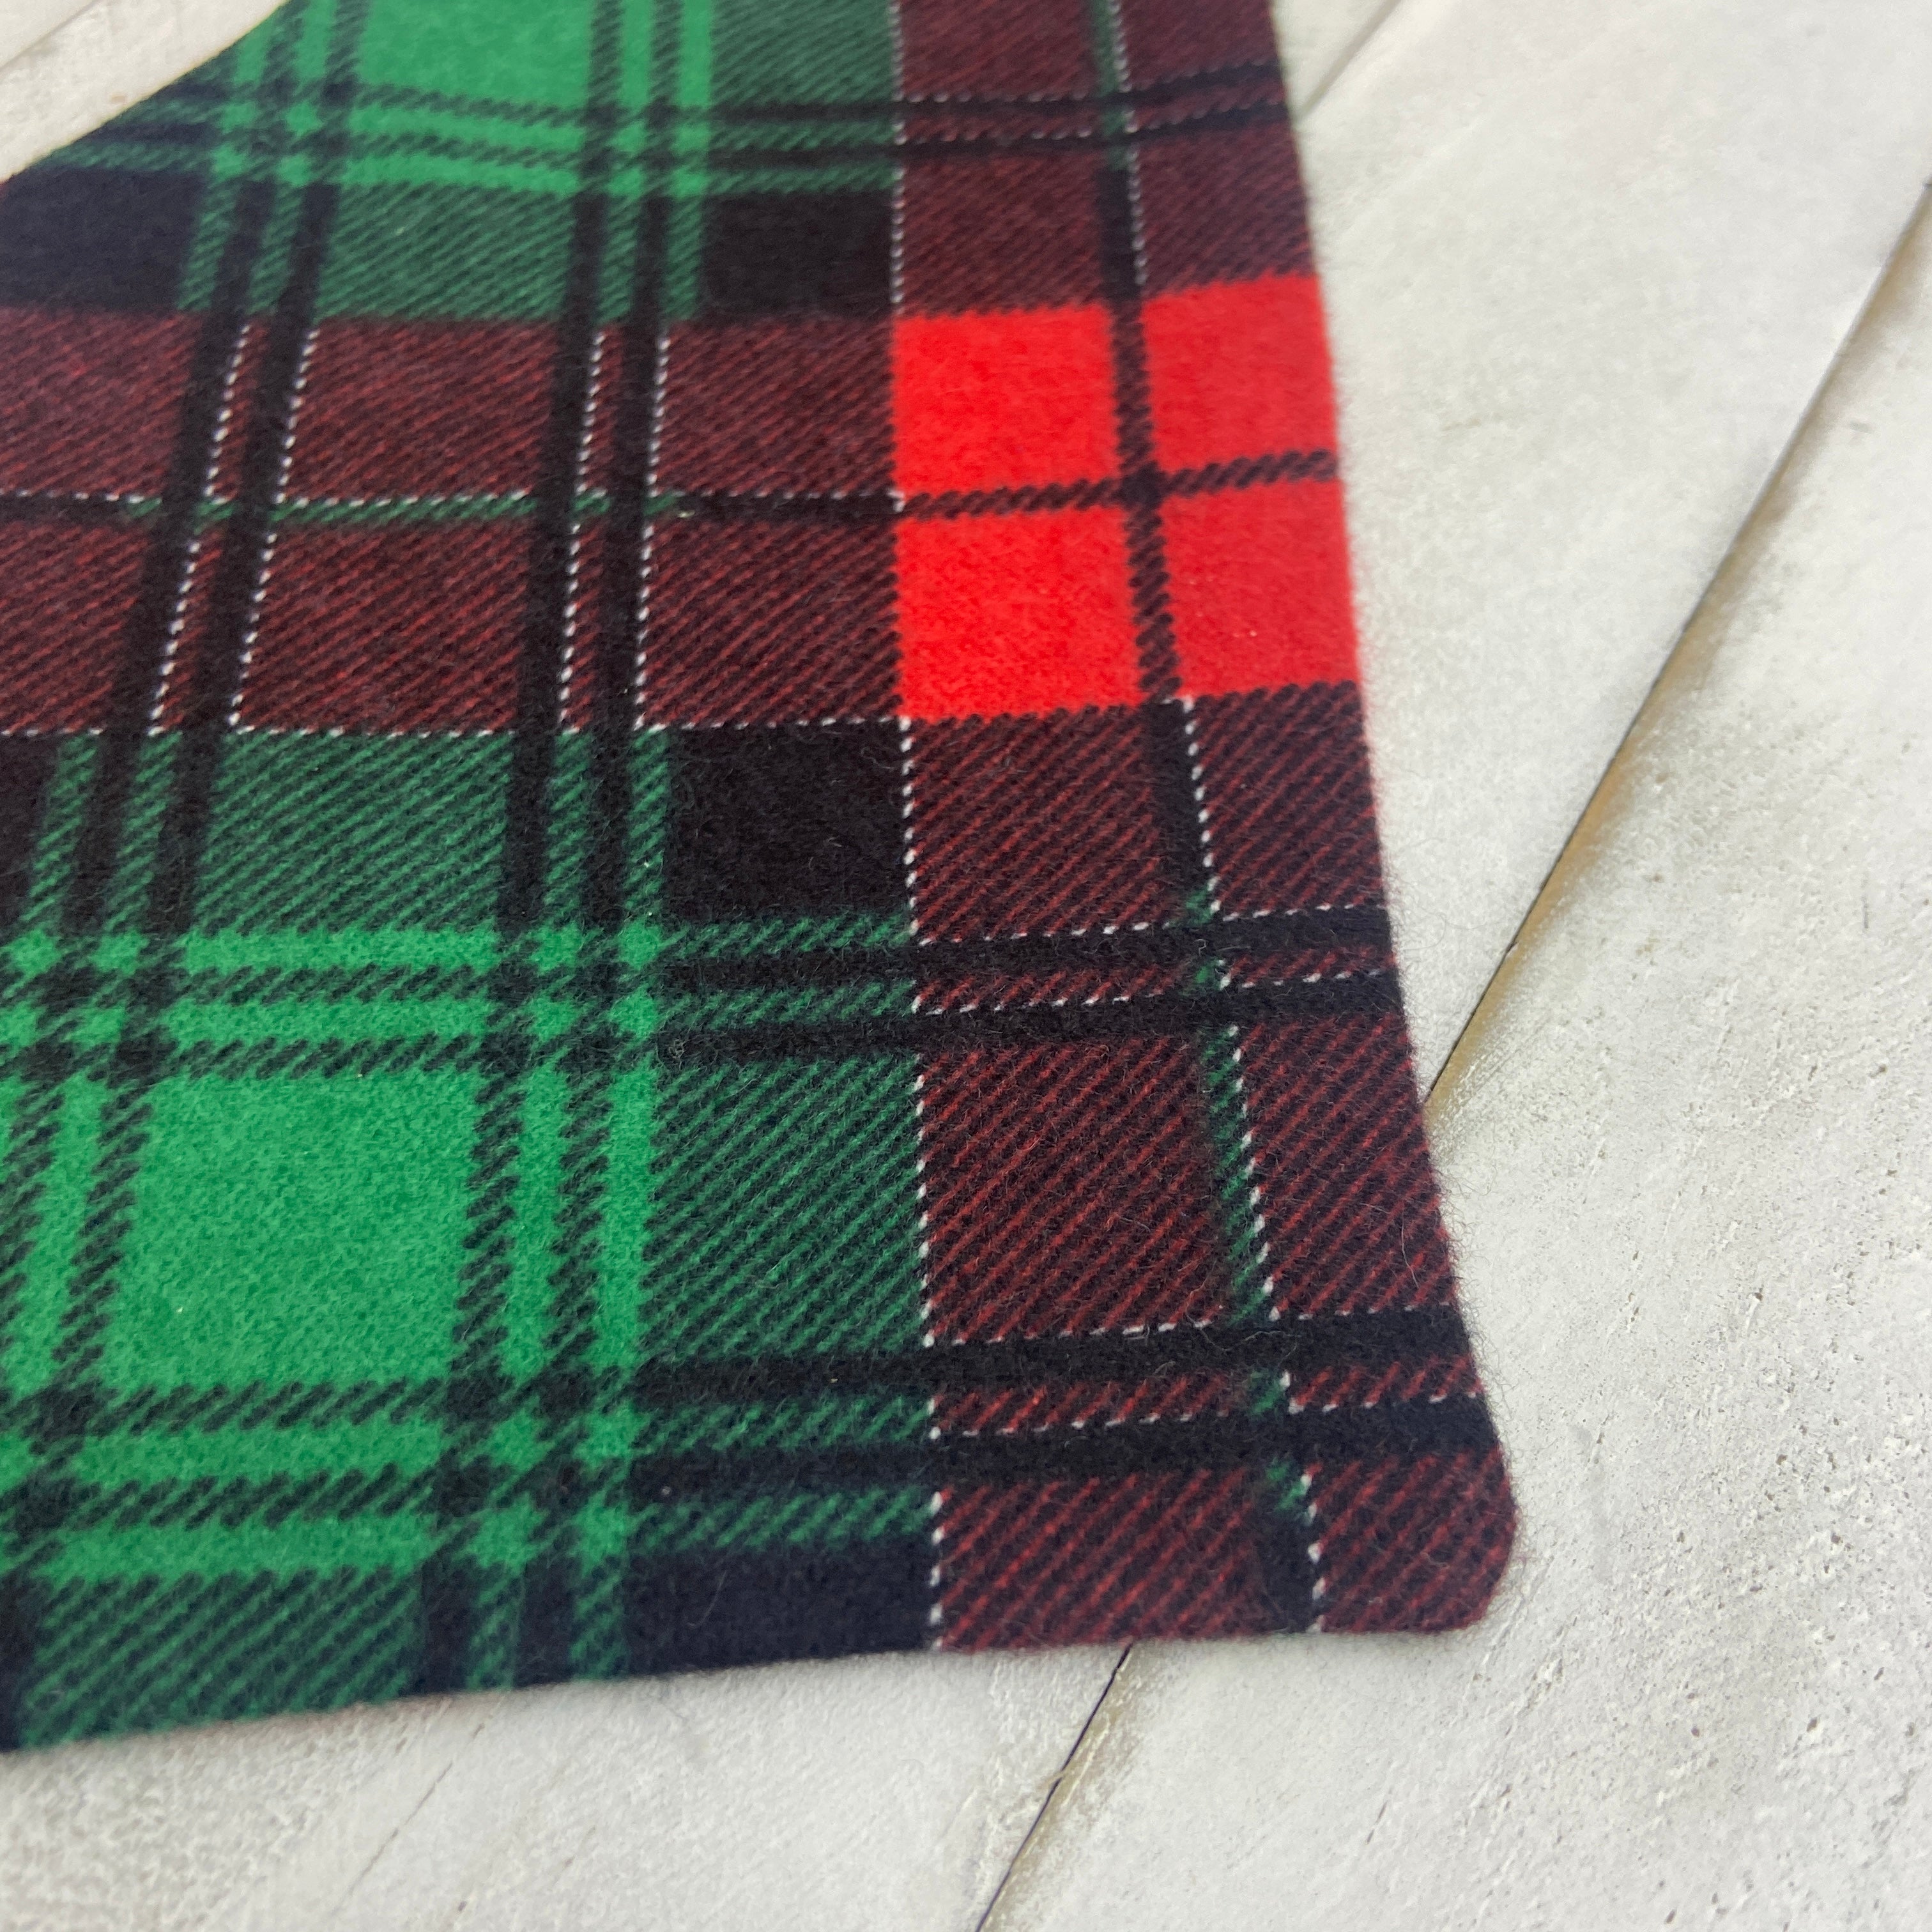 Pet Bandana - Large Print Red and Green Plaid Flannel